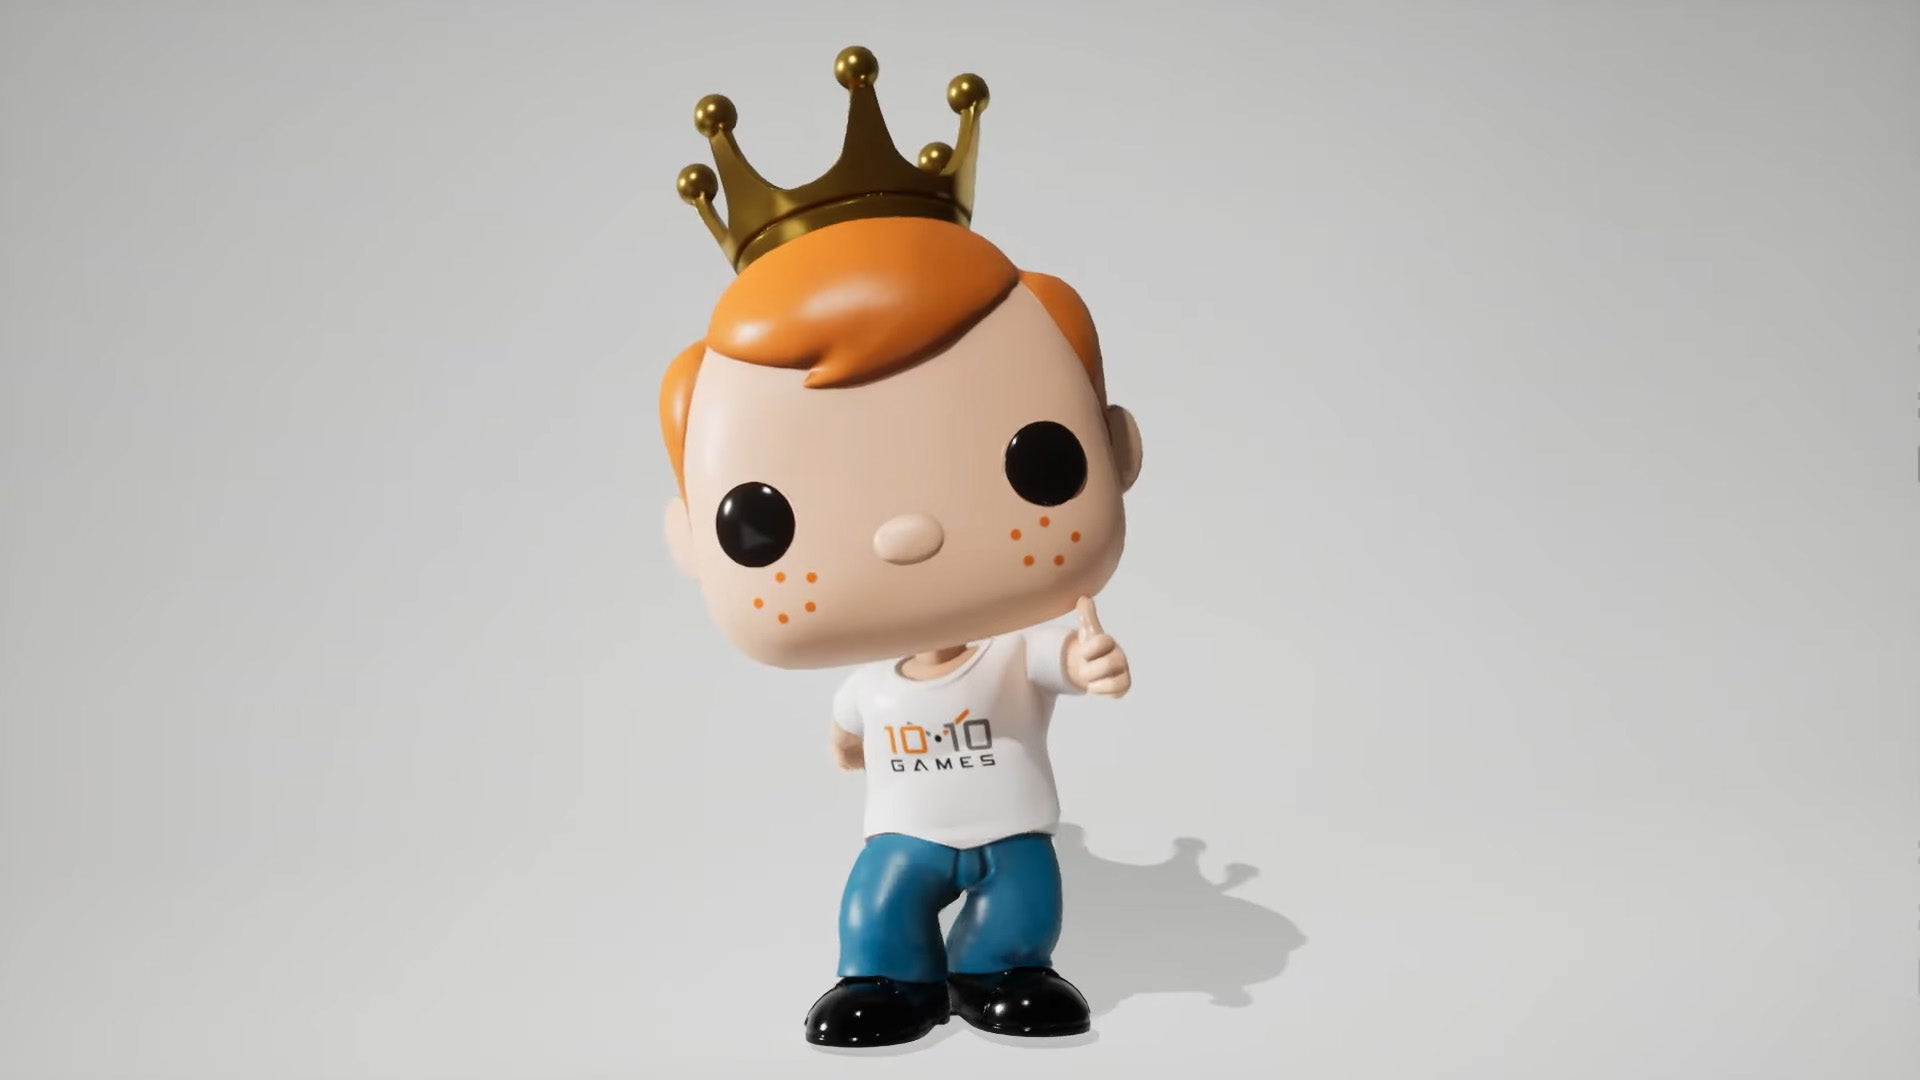 Screenshot of the announcement trailer for a Funko AAA video game showing a character called Freddy giving a thumbs up, he is ginger and he is wearing a crown.